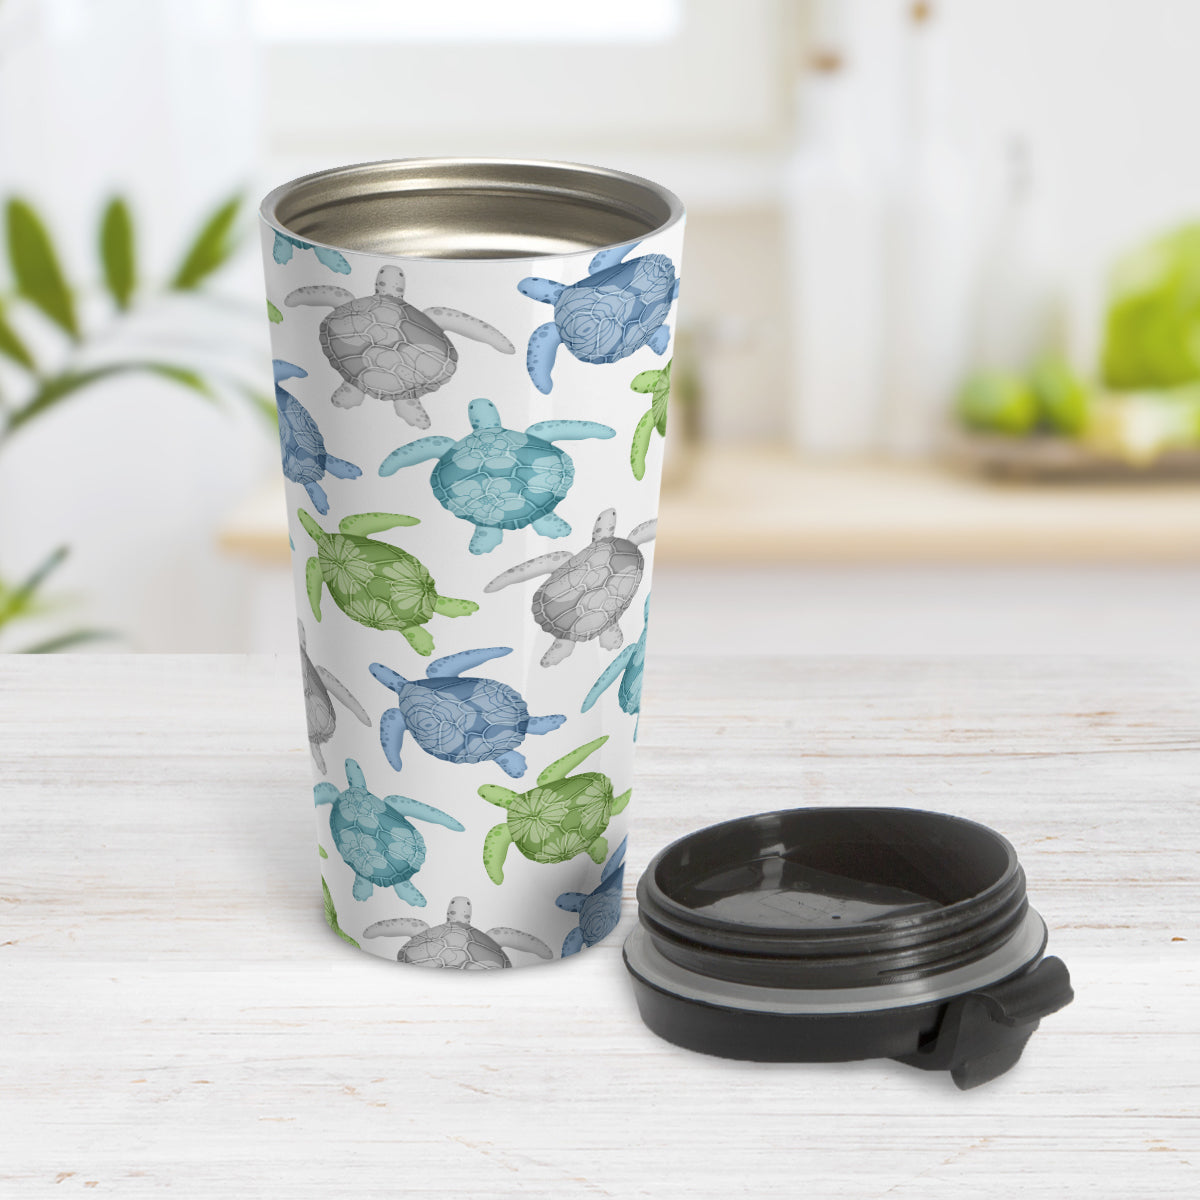 Cool Sea Turtles Pattern Travel Mug (15oz, stainless steel insulated) at Amy's Coffee Mugs. A travel mug with a pattern of sea turtles in a cool color palette of blue, green, turquoise and gray that wraps around the travel mug. Each cool colored sea turtle has a different floral watermark over its shell.